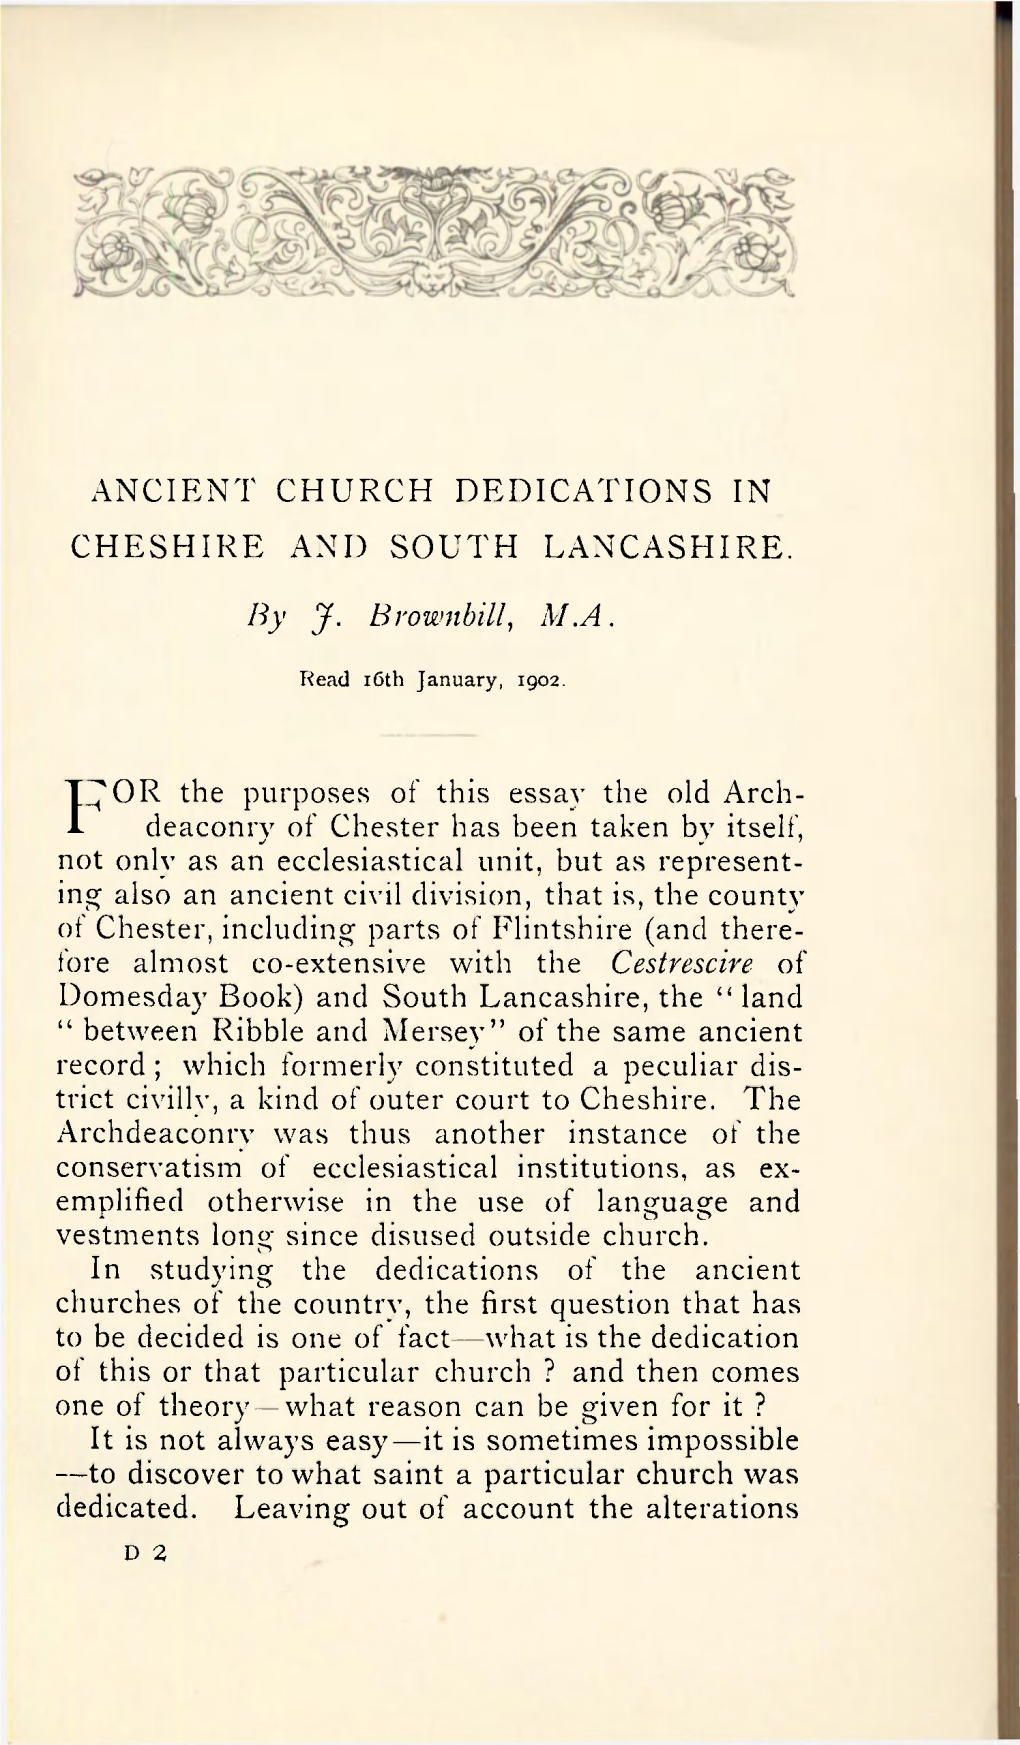 Ancient Church Dedications in Cheshire and South Lancashire